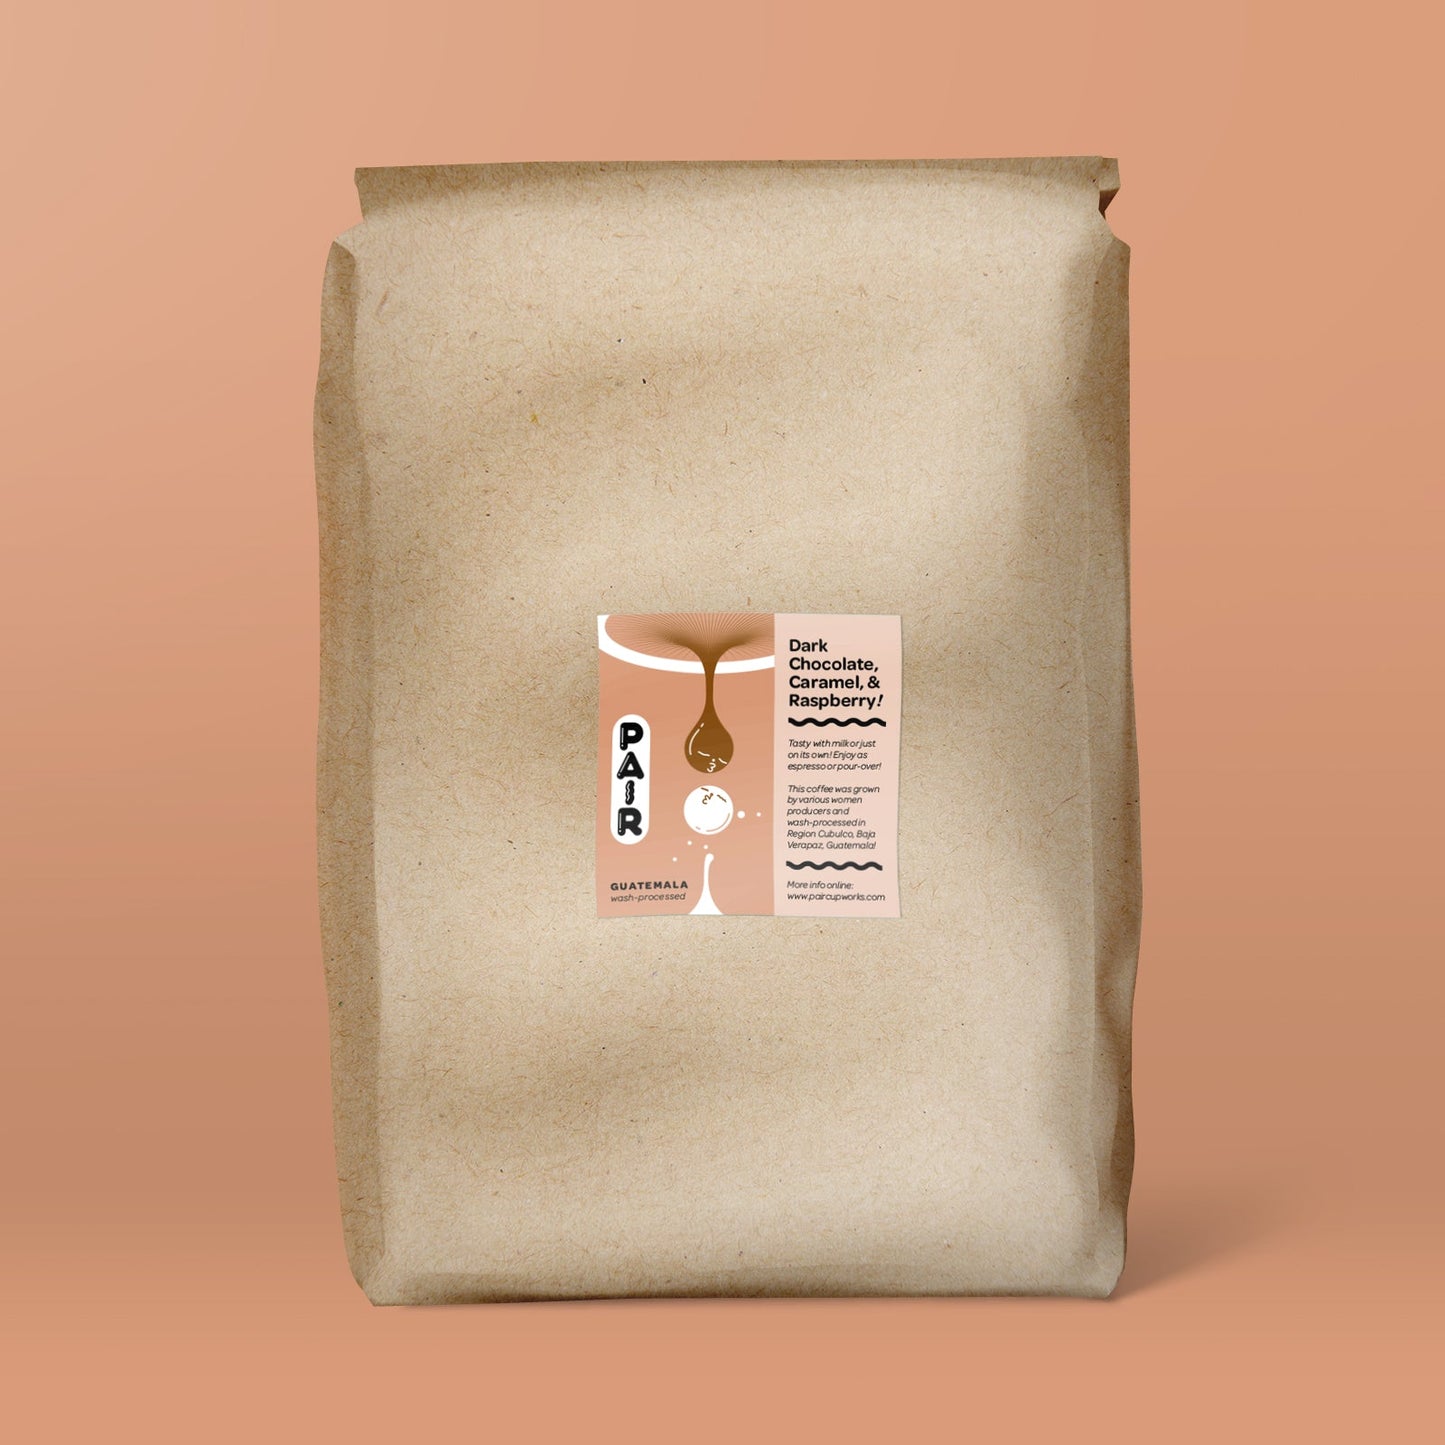 A five-pound bag of wash-processed coffee beans originating from Guatemala and roasted by Pair Cupworks